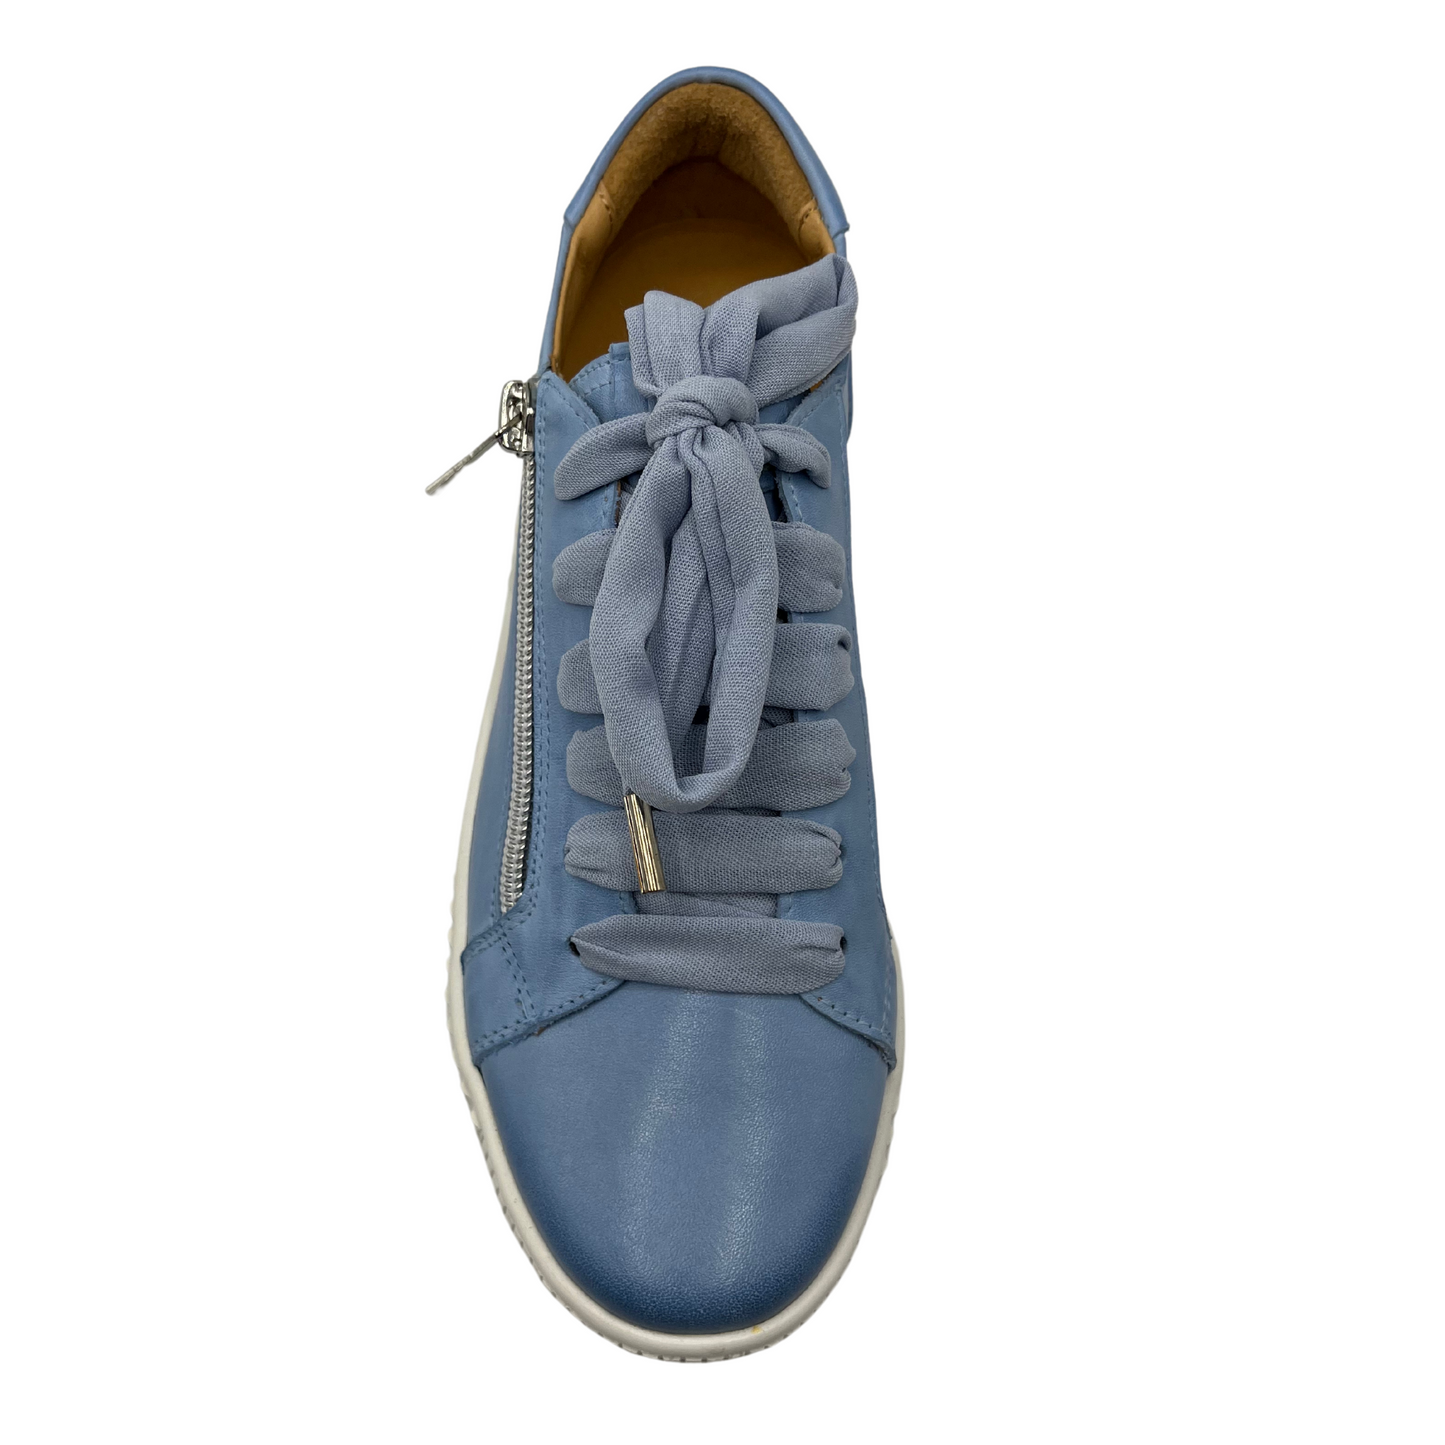 Top view of blue leather sneaker with white rubber outsole